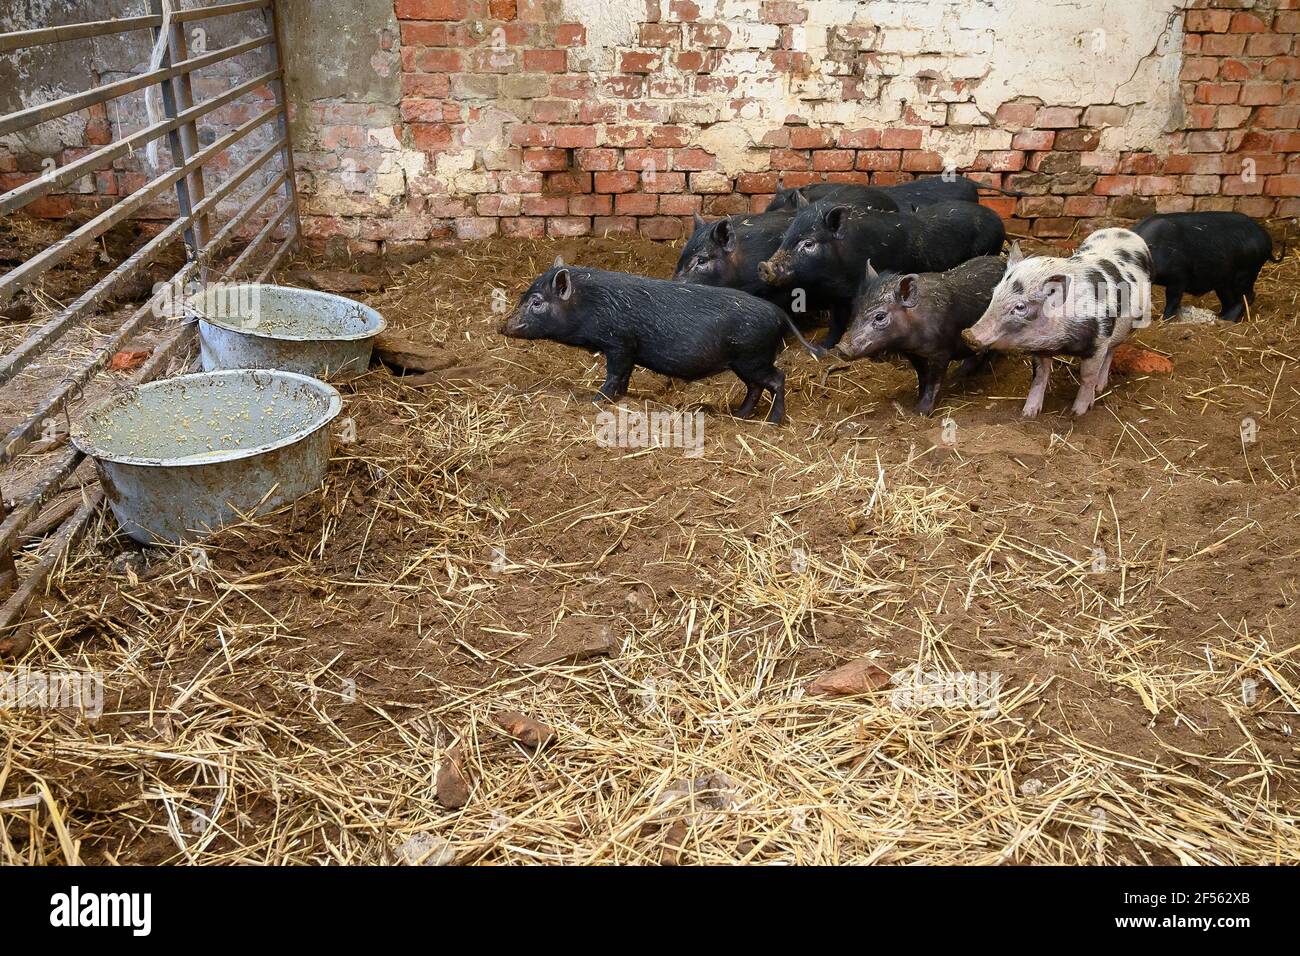 Vietnamese mini pigs ready to eat from feeding bowls in pig sty Stock Photo